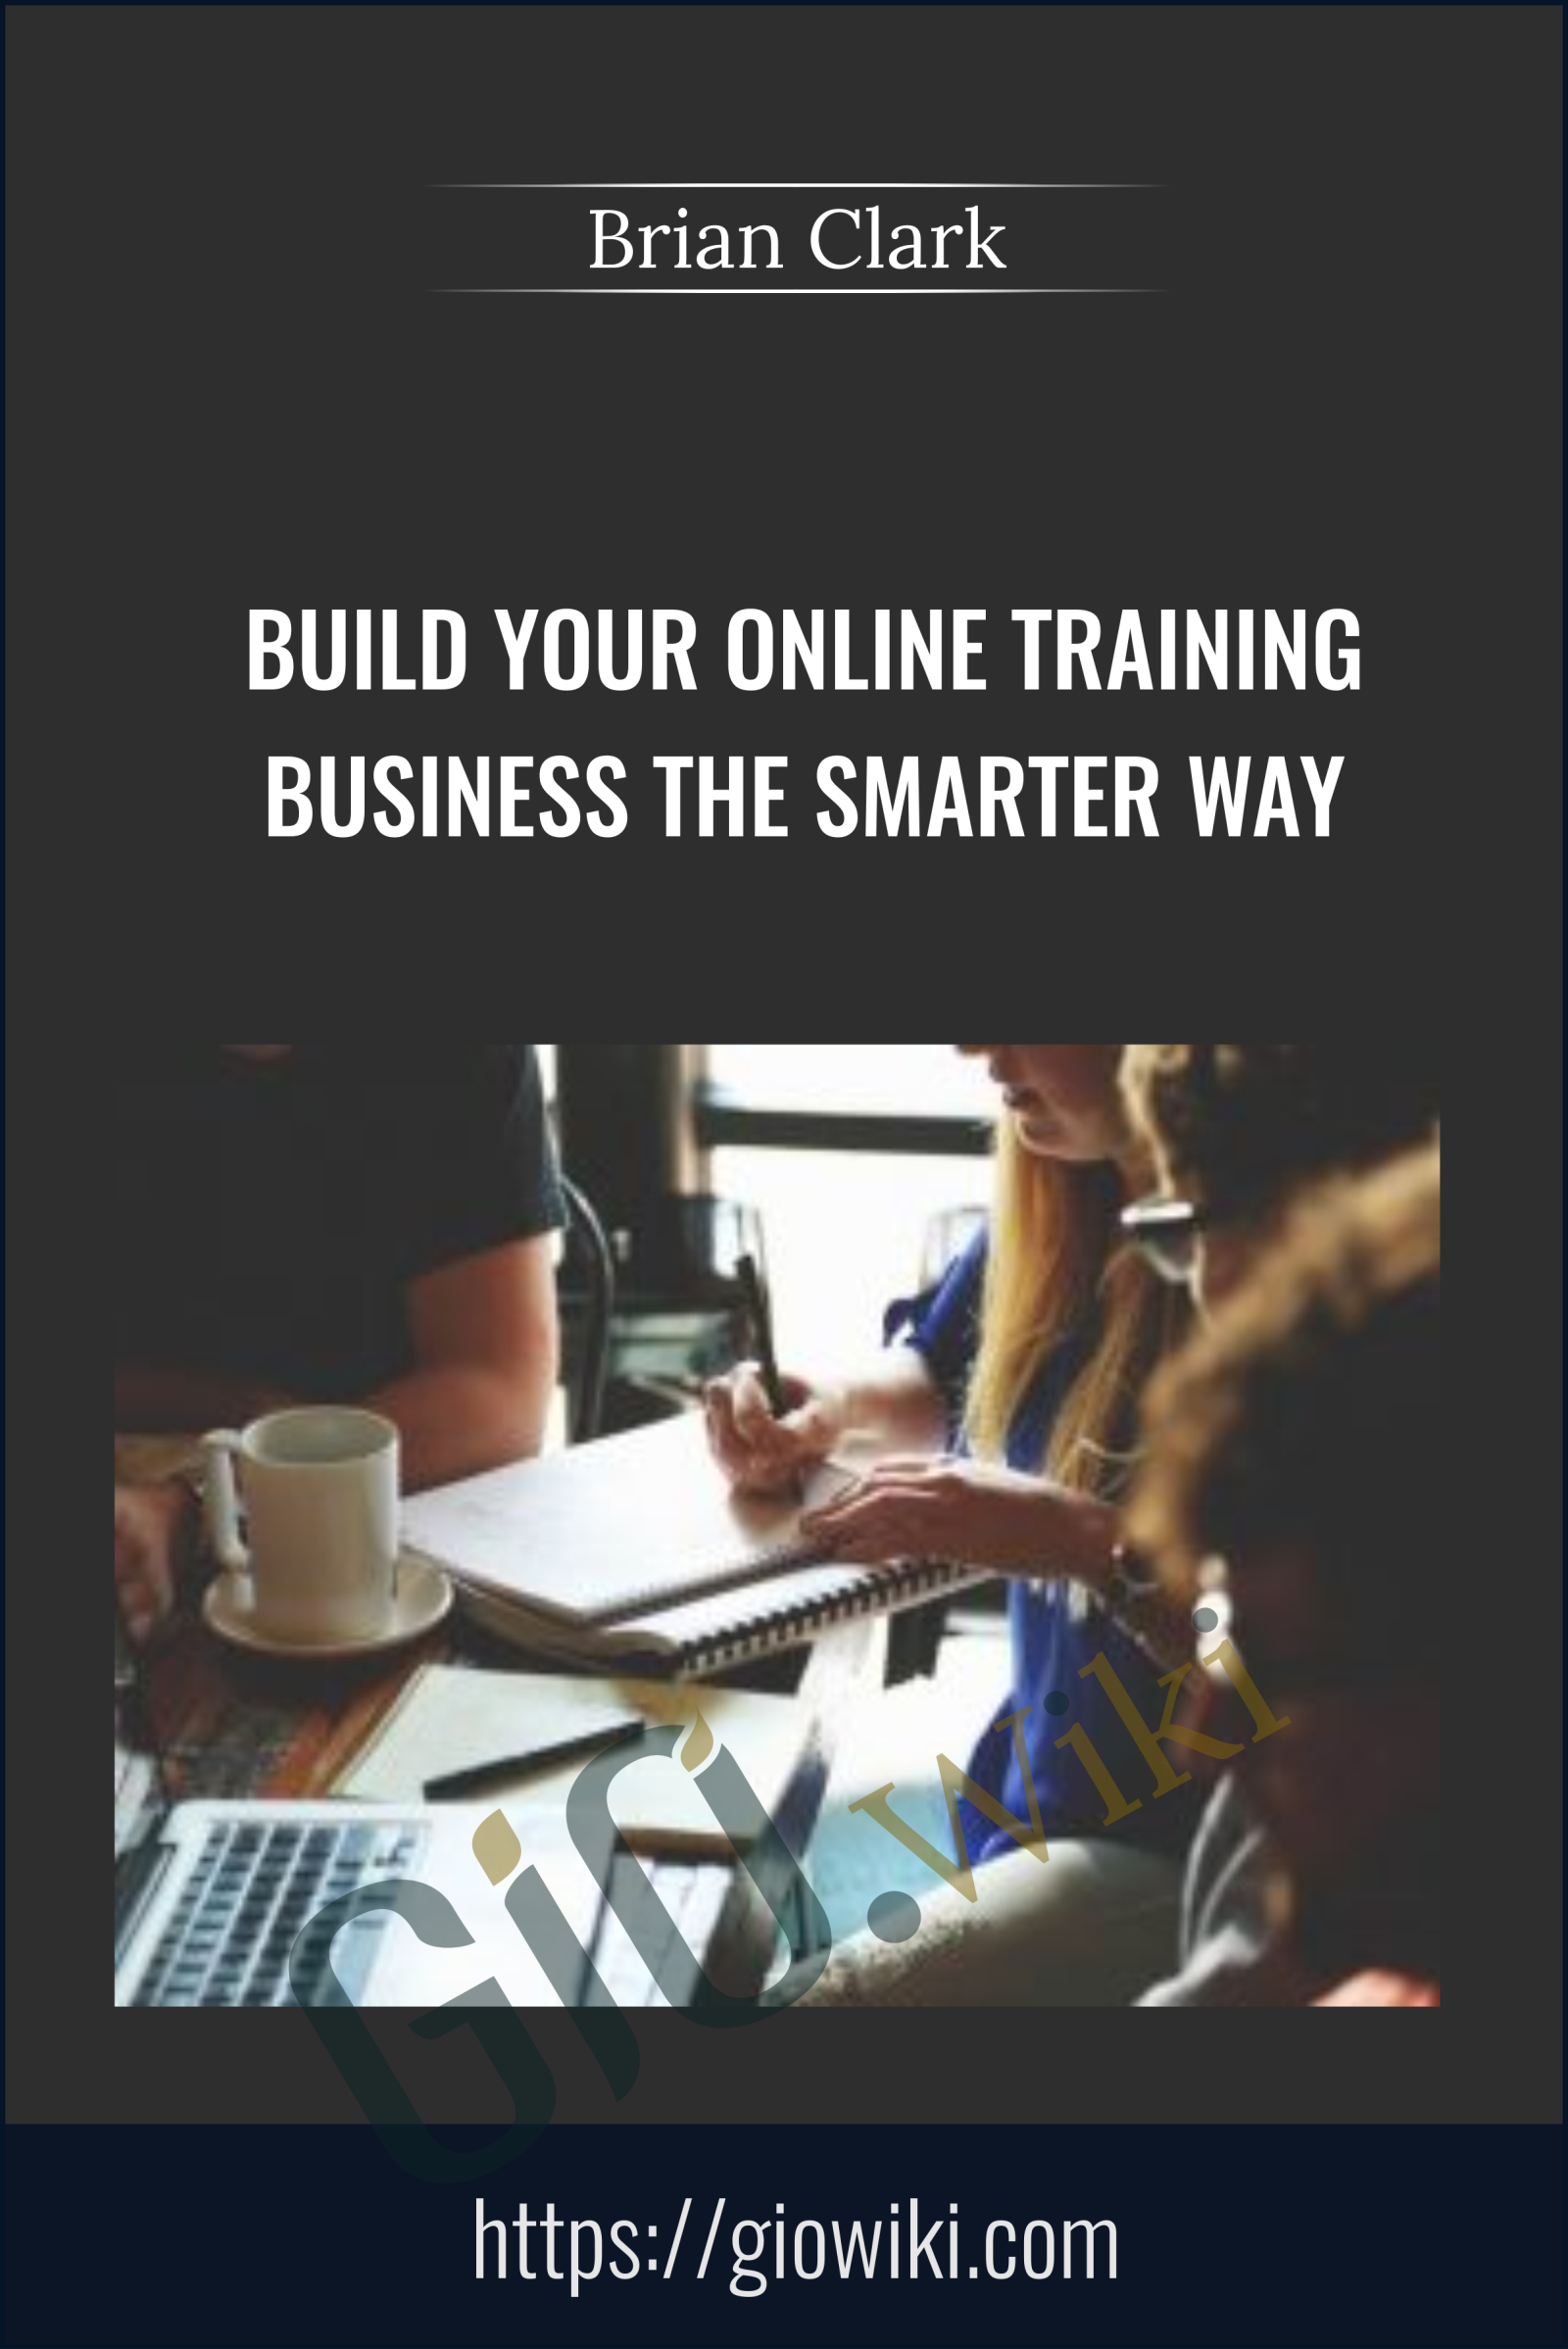 Build Your Online Training Business the Smarter Way - Brian Clark